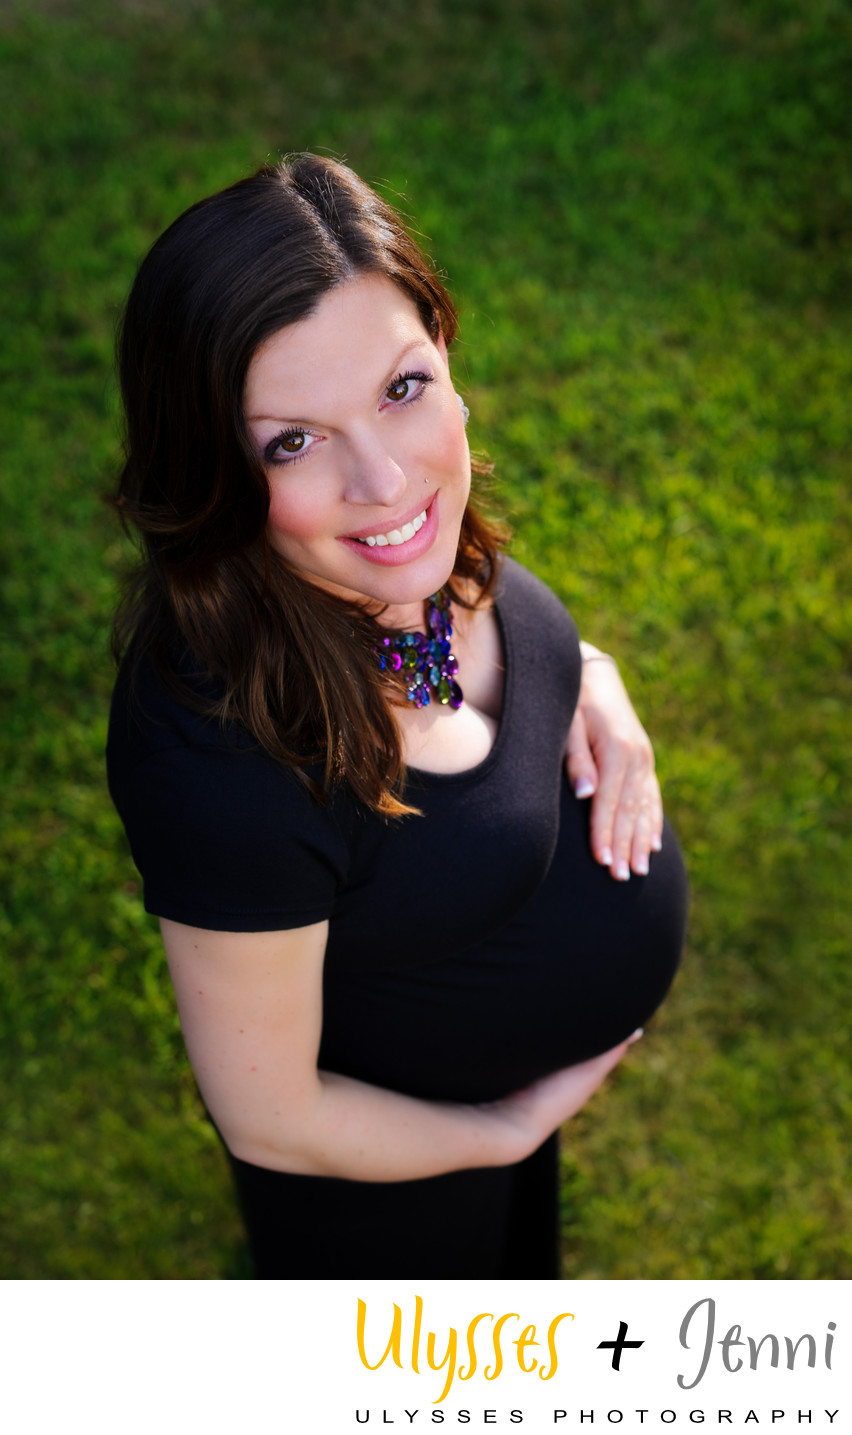 How to Look Beautiful for Maternity Photo Shoot